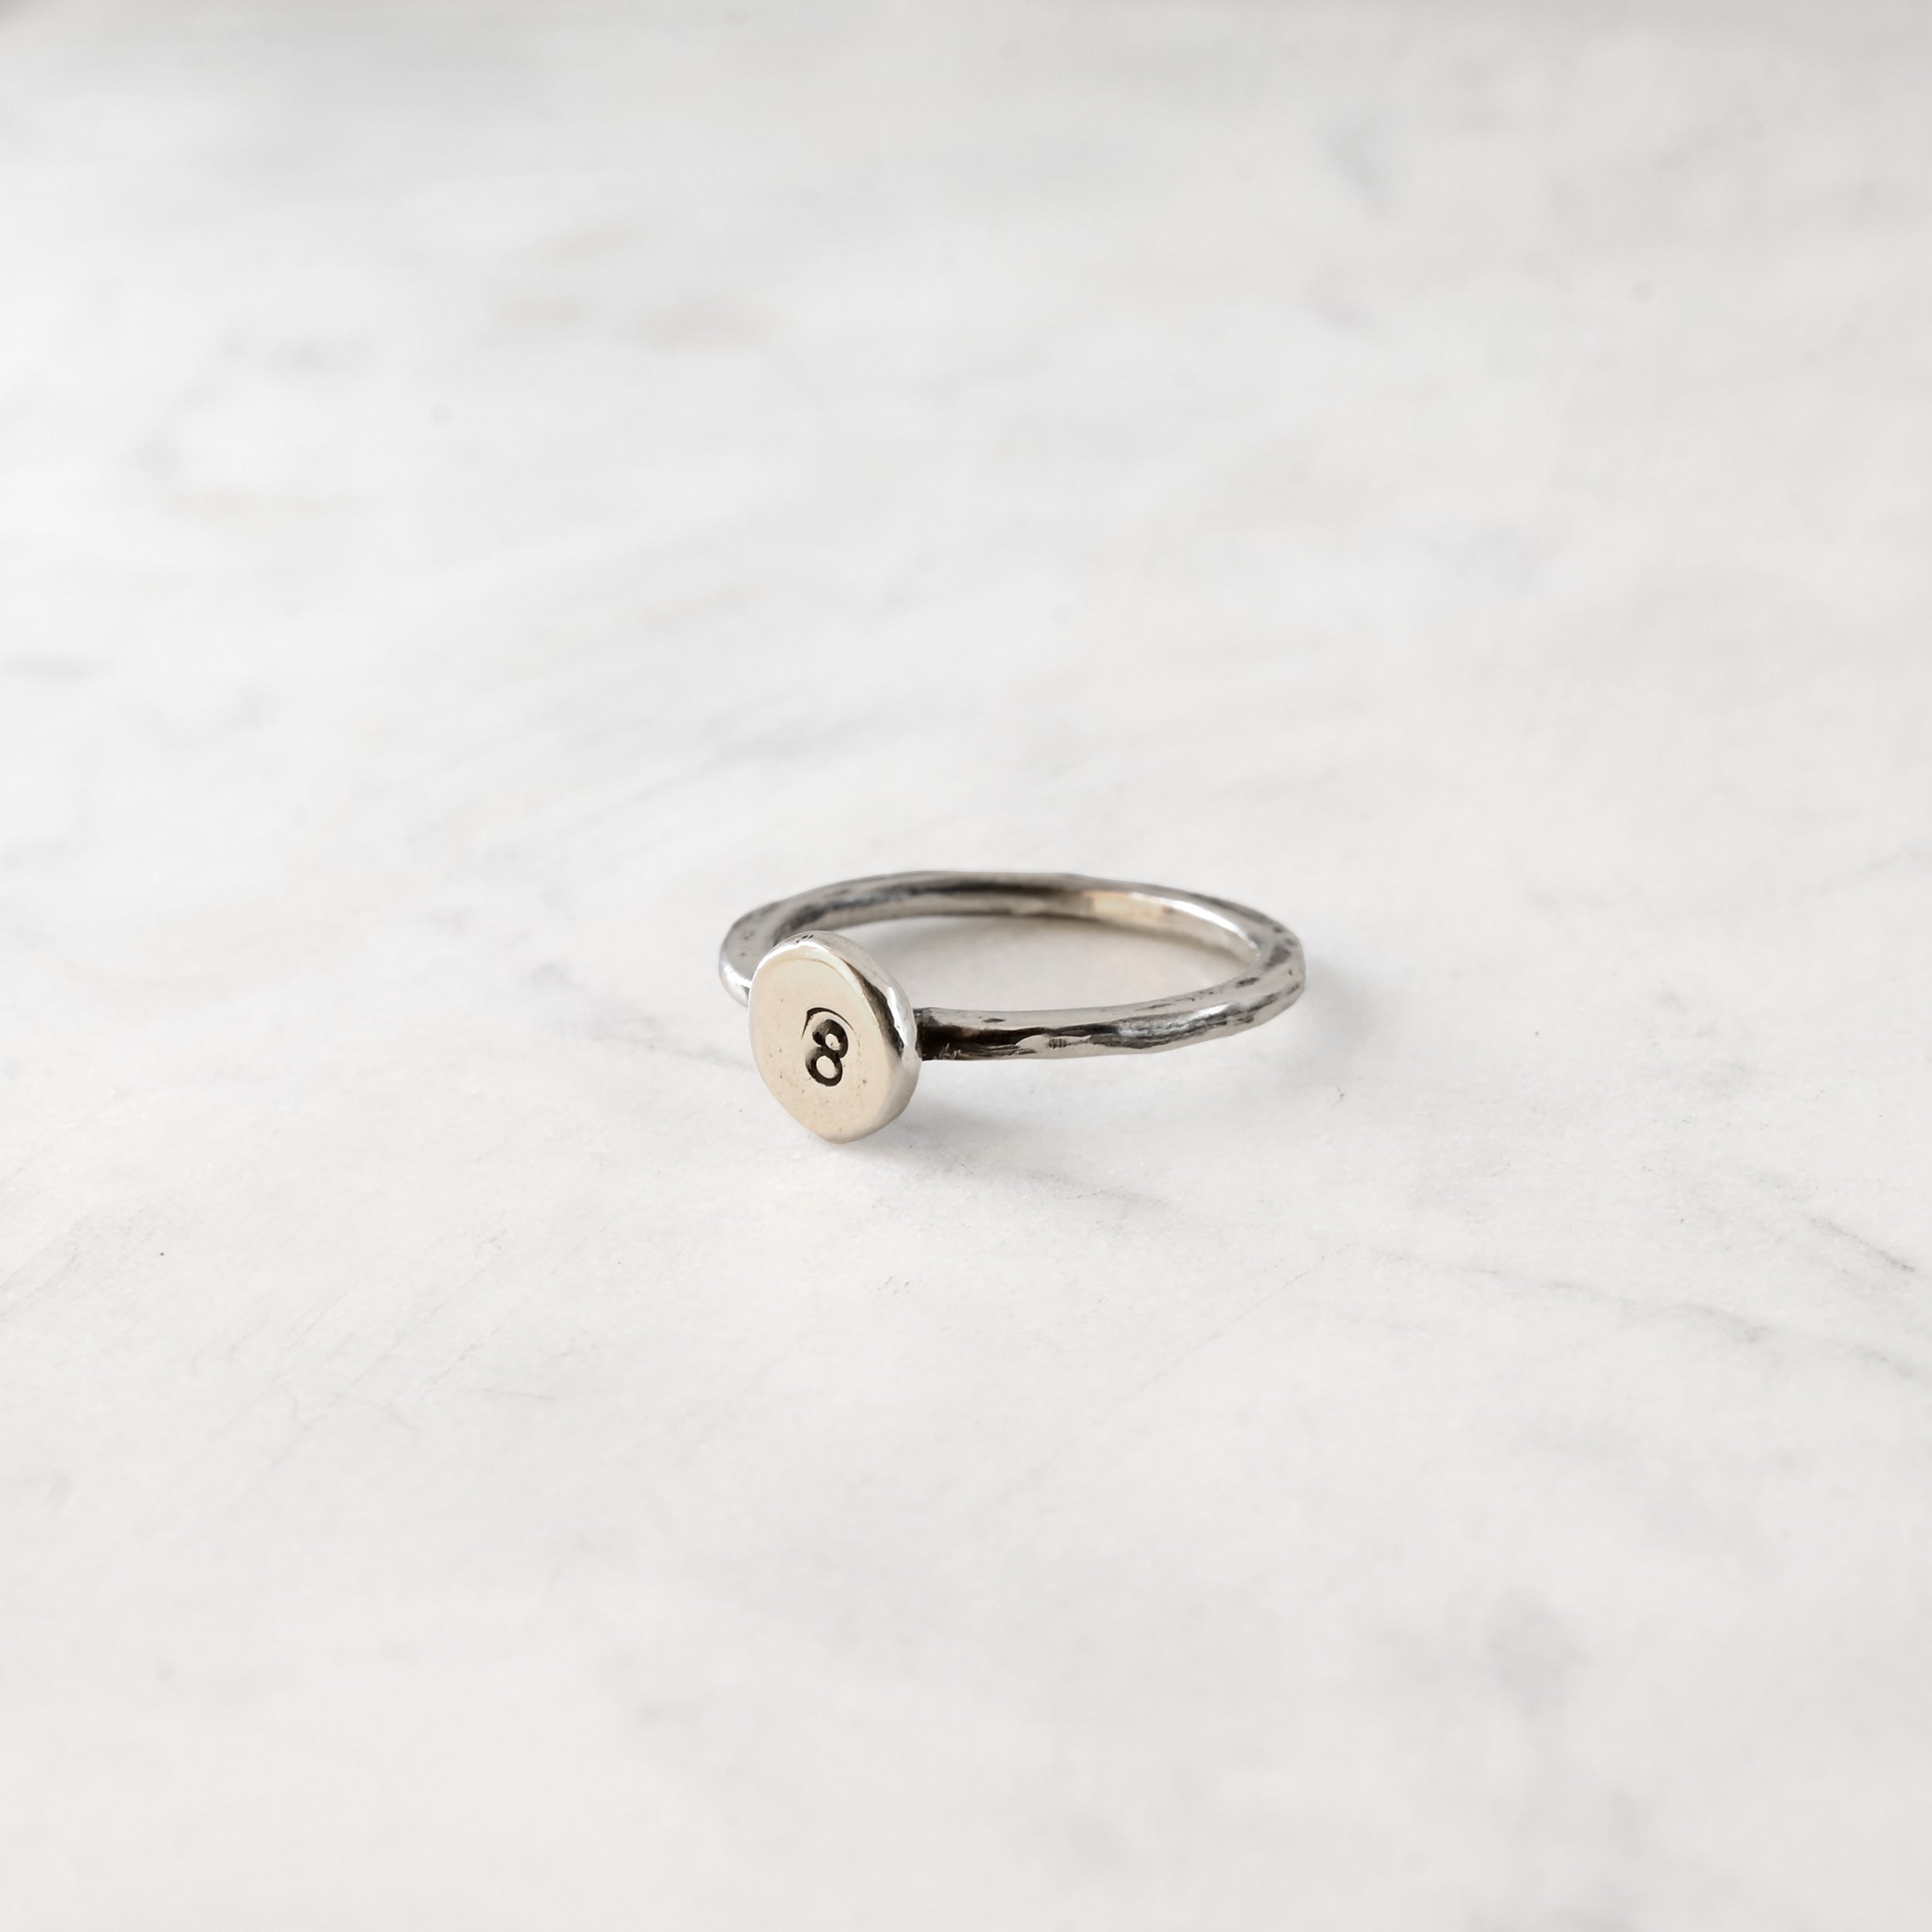 ATELIER ring - 8, silver